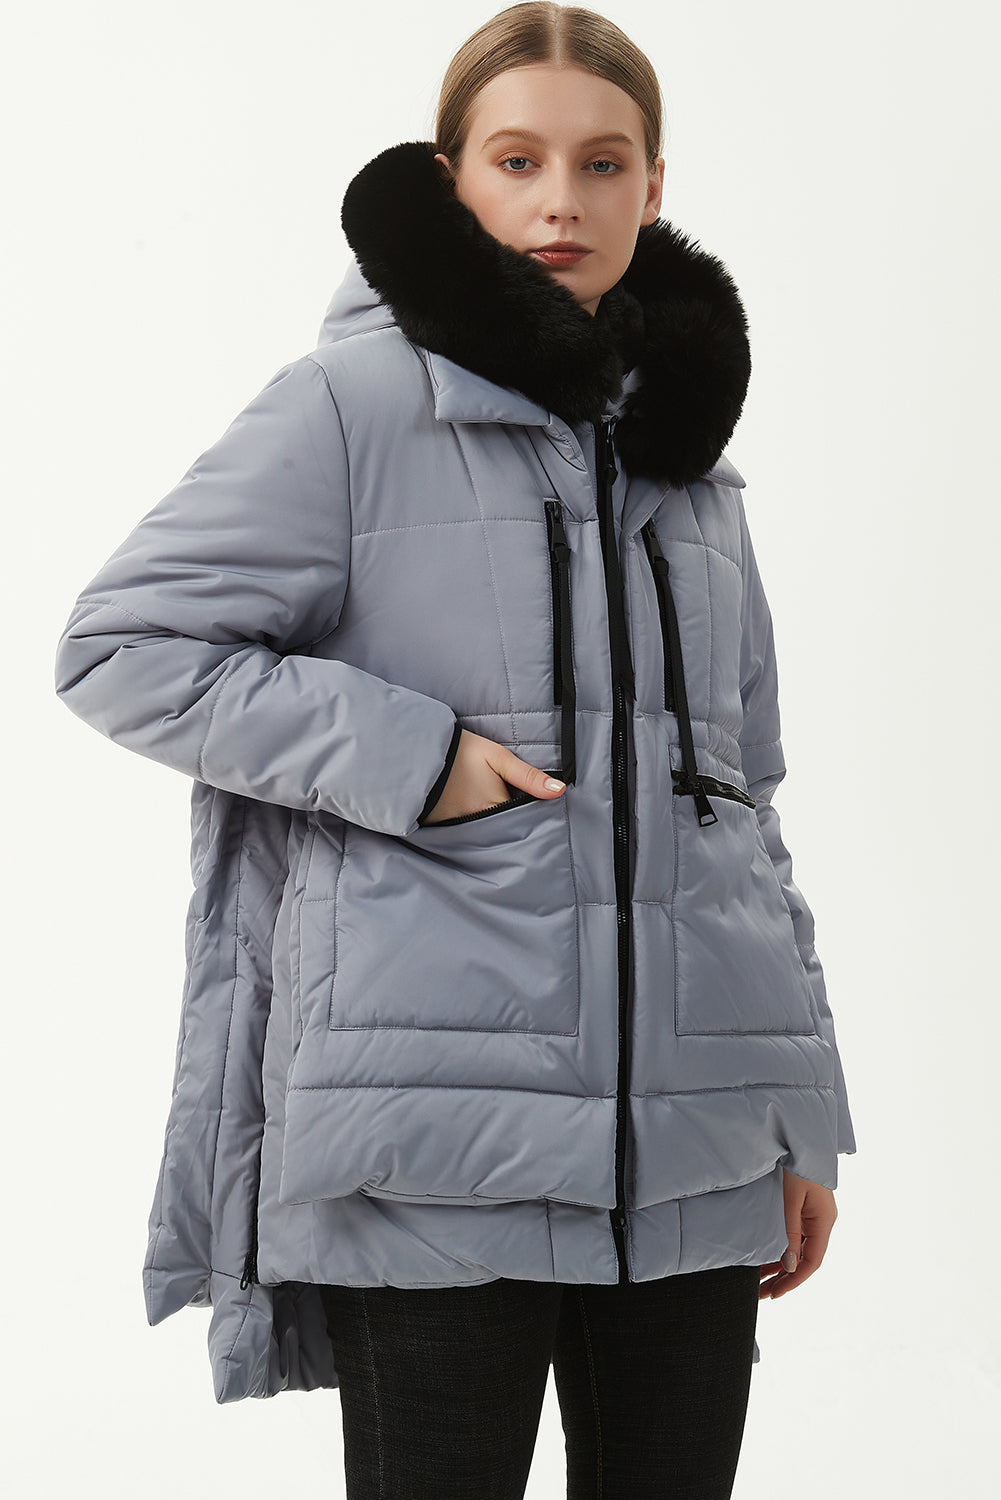 - Wisteria Plush Linen Zip Up Hooded Puffer Coat - 7 colors - womens coat at TFC&H Co.